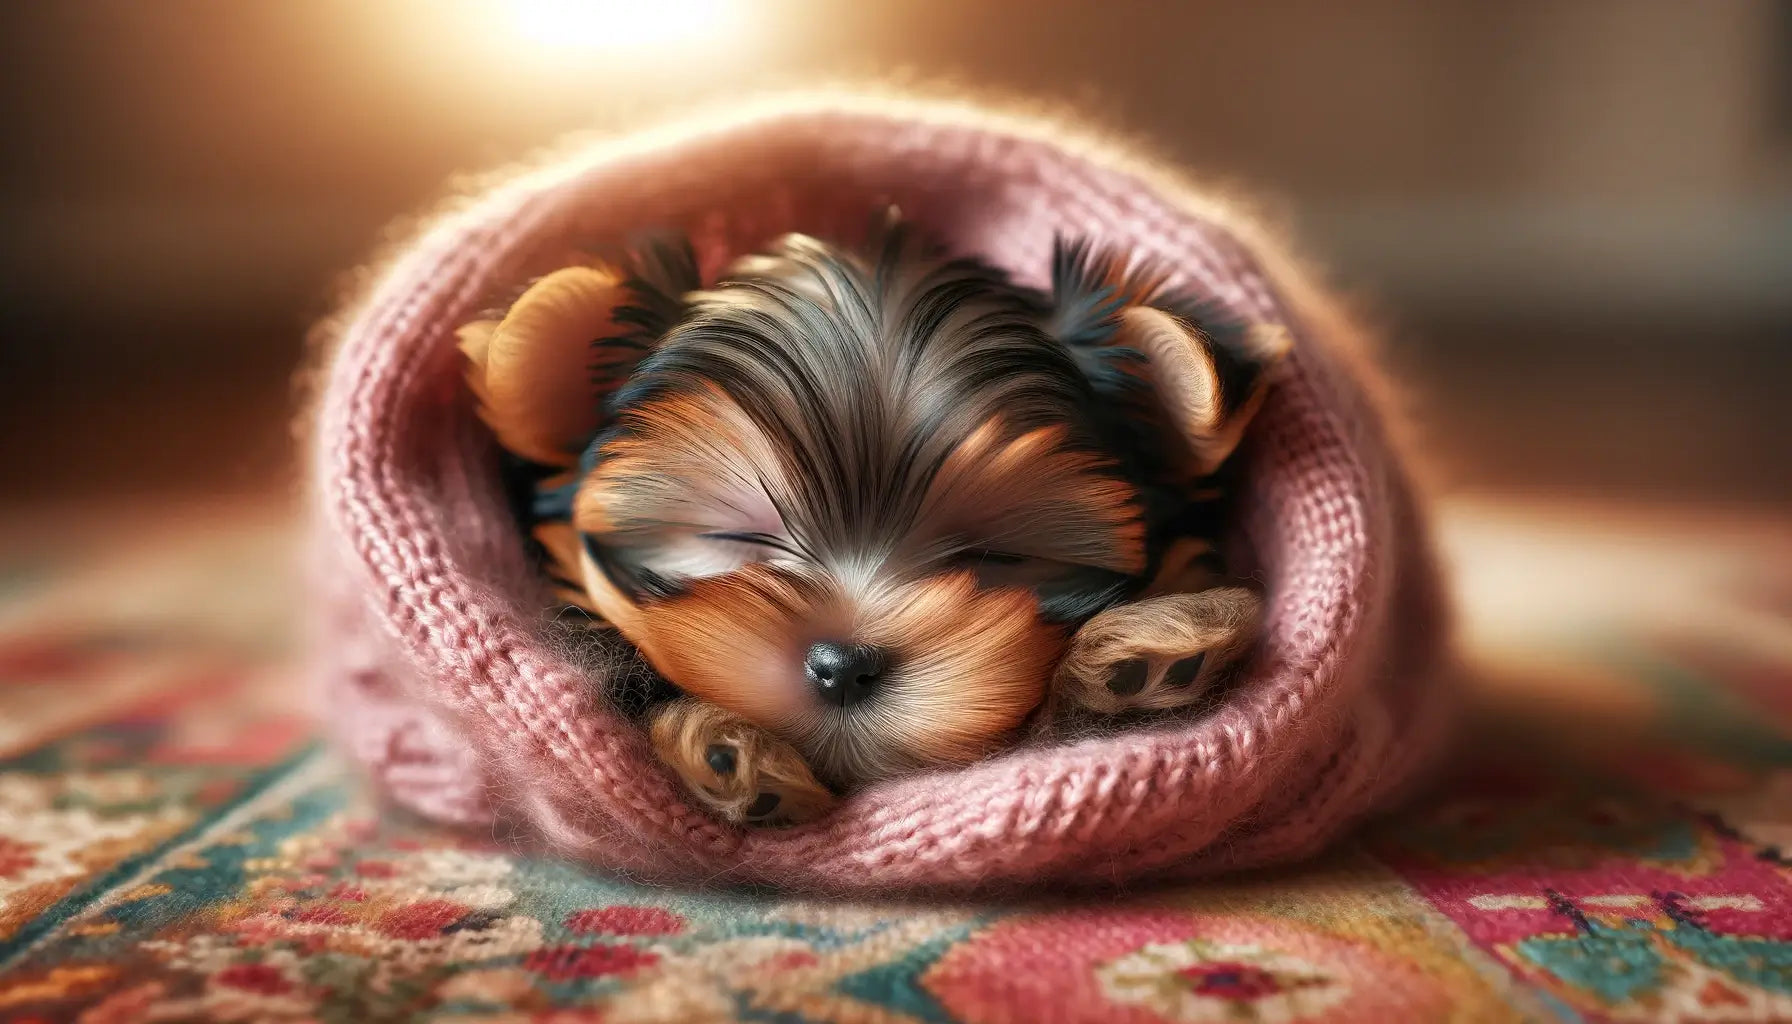 A Teacup Yorkie puppy nestles on a colorful rug.